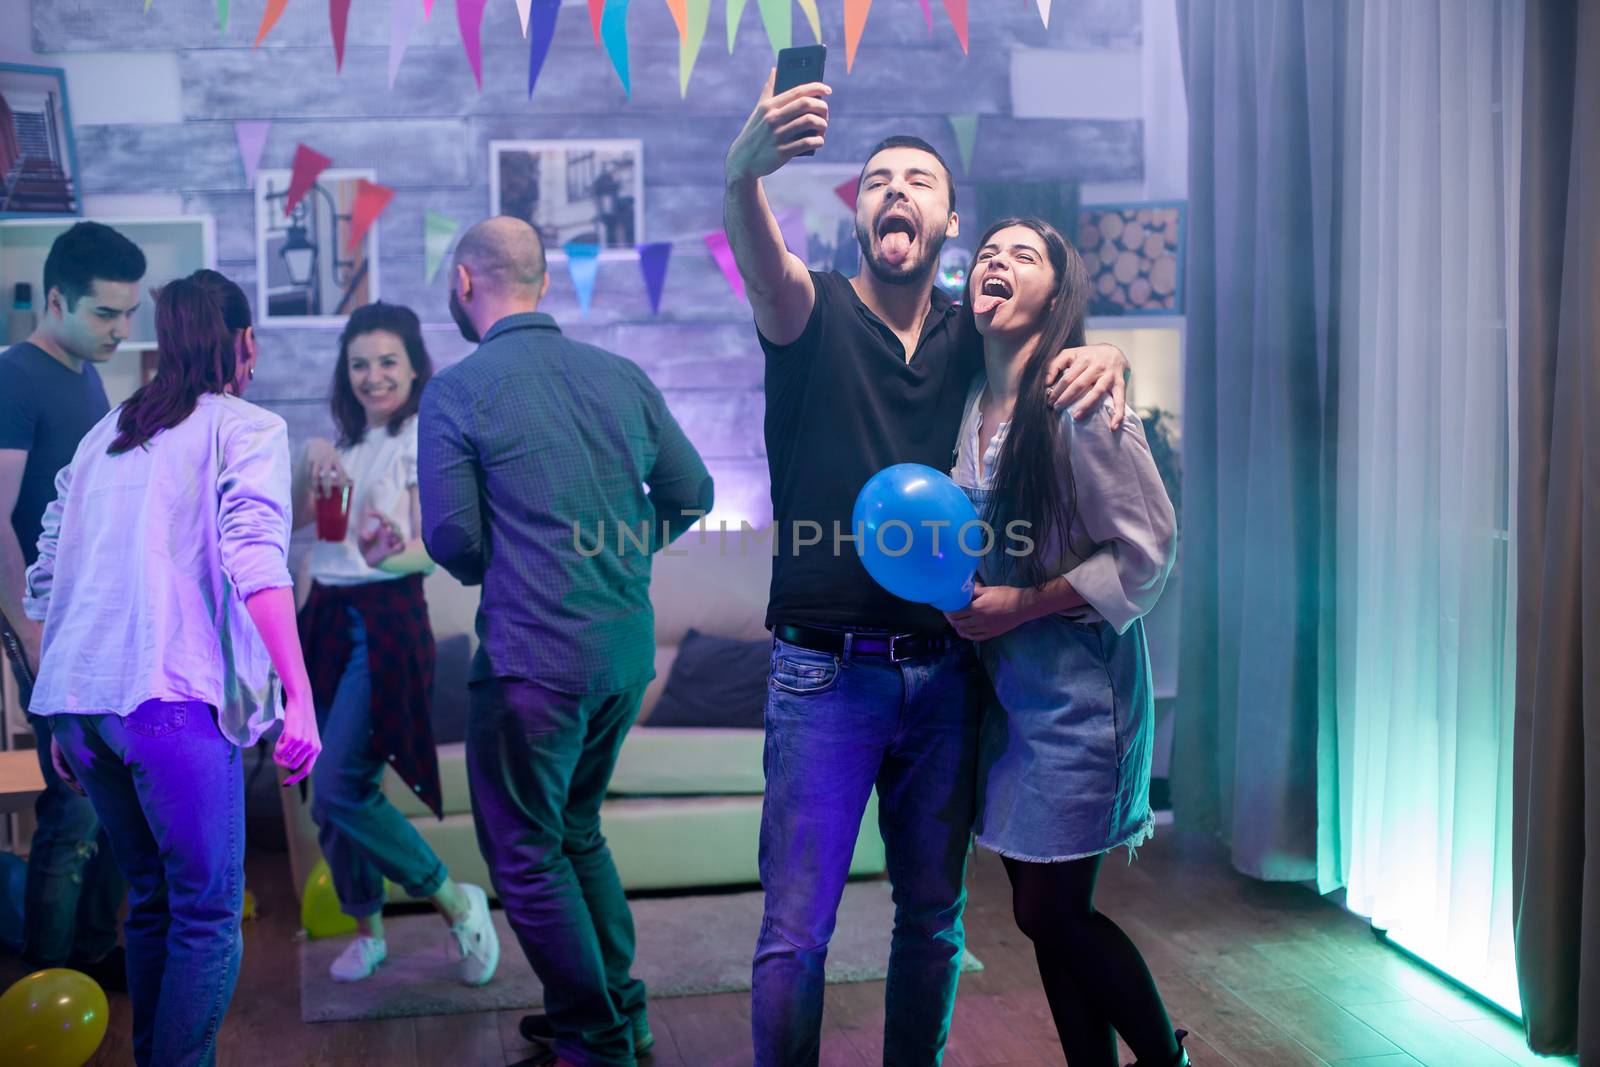 Bearded man and his girlfriend with tongue out taking a selfie while partying with their friends.